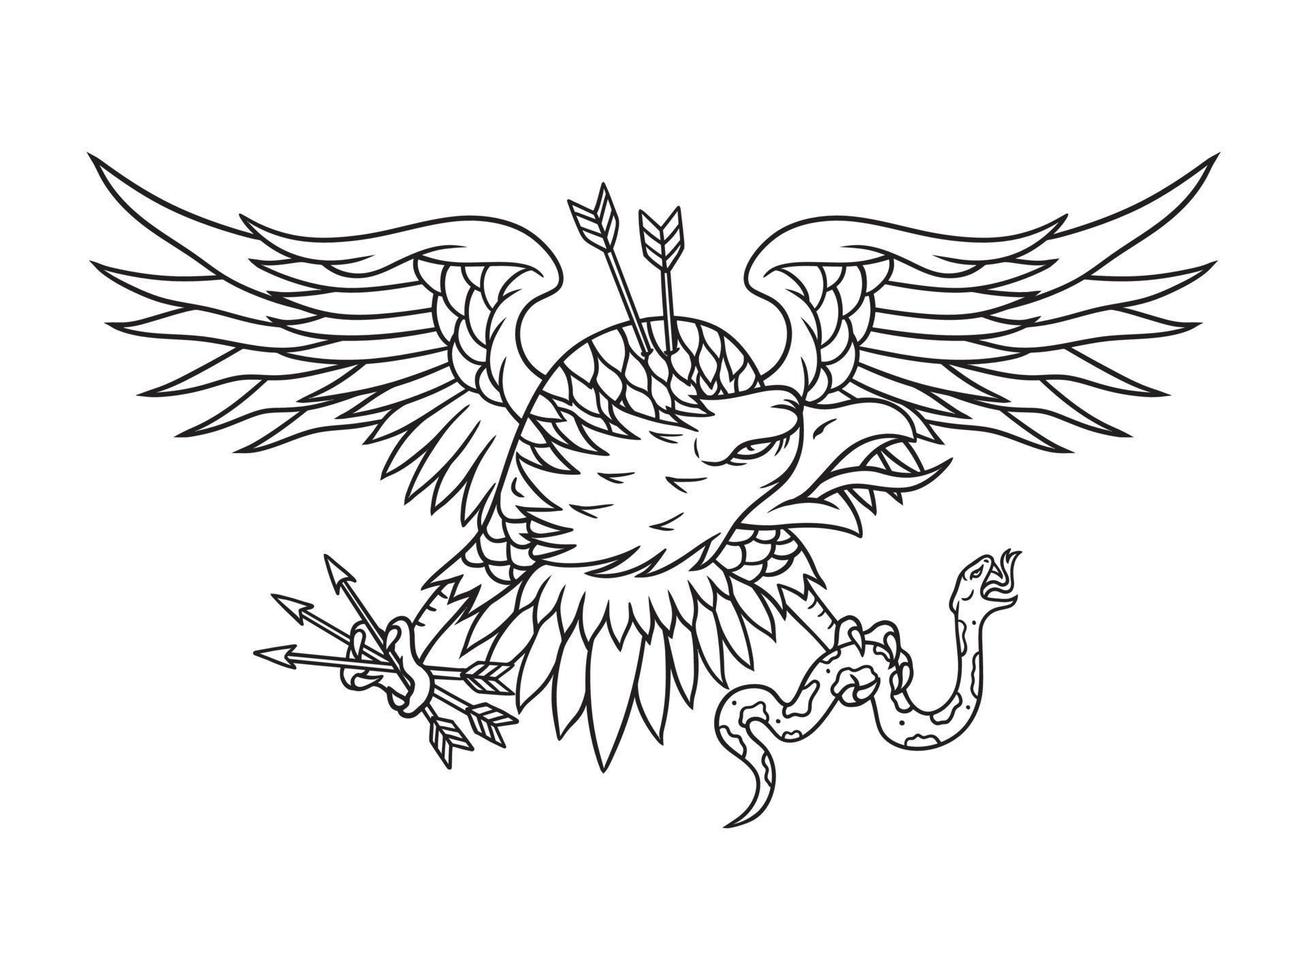 Wild eagle gripping snakes and arrows, Vector line art illustration